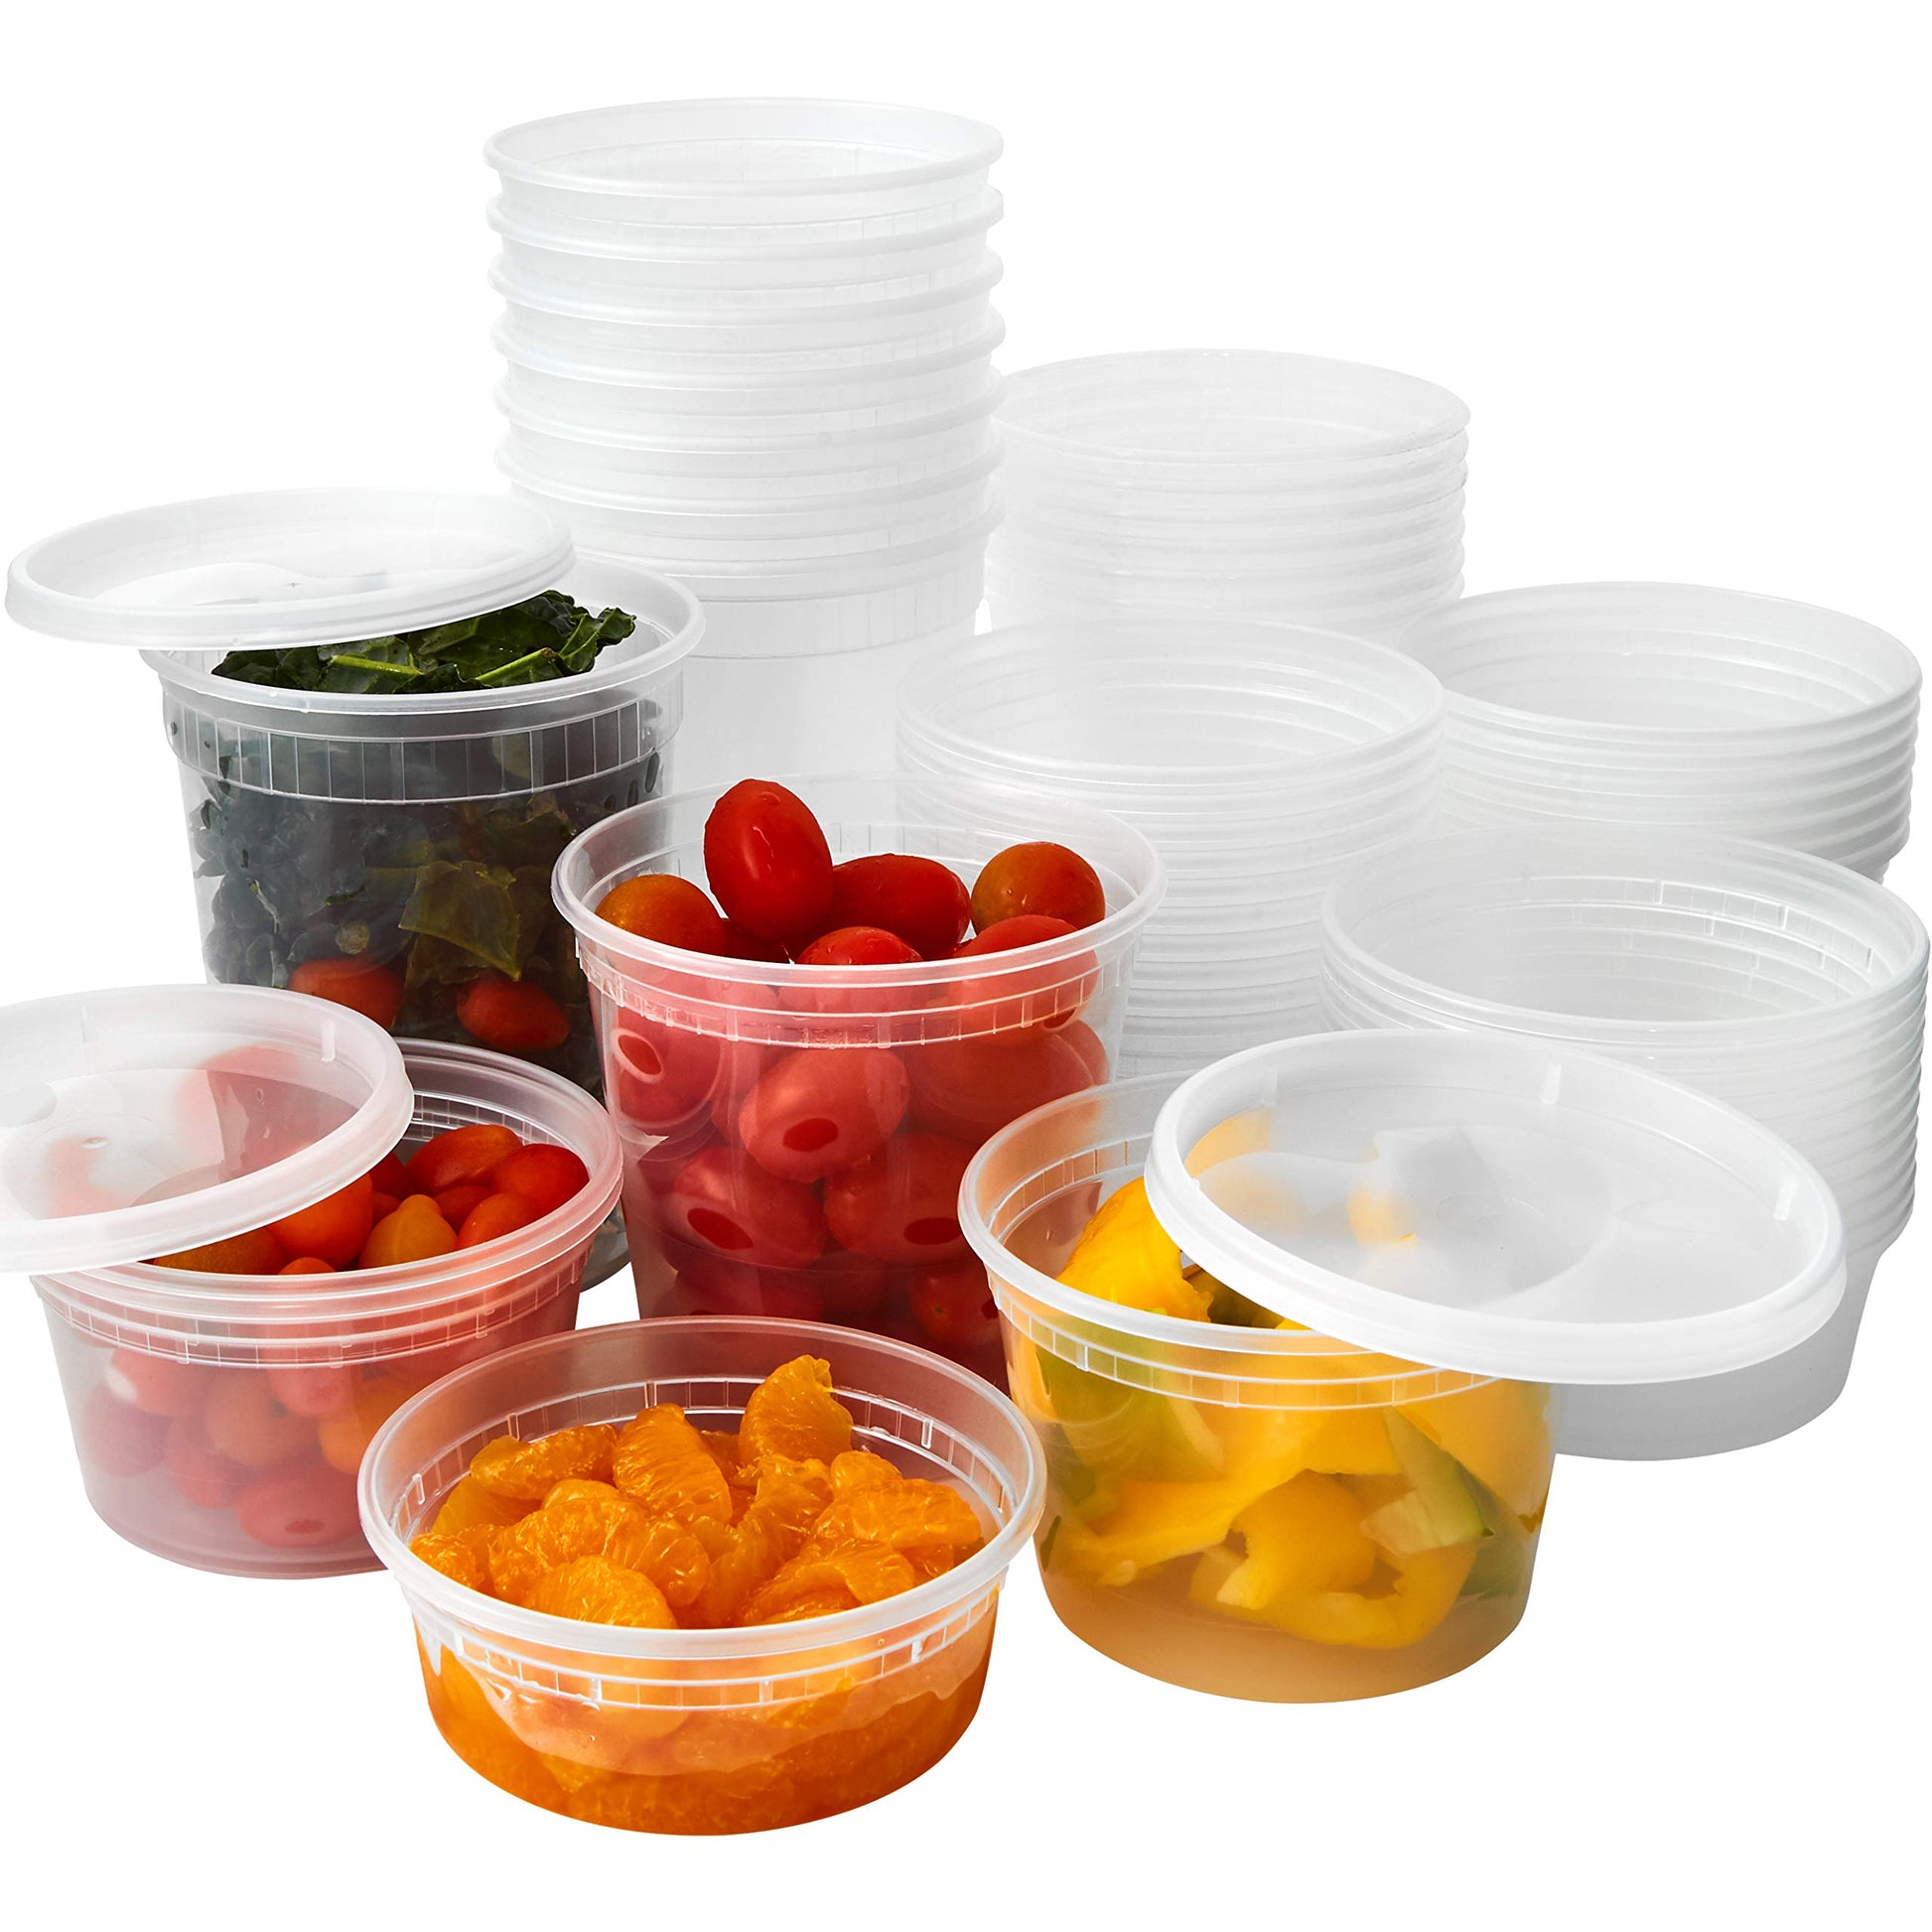 8 oz. Deli Food Storage Containers With Airtight Lids - Slime Containers